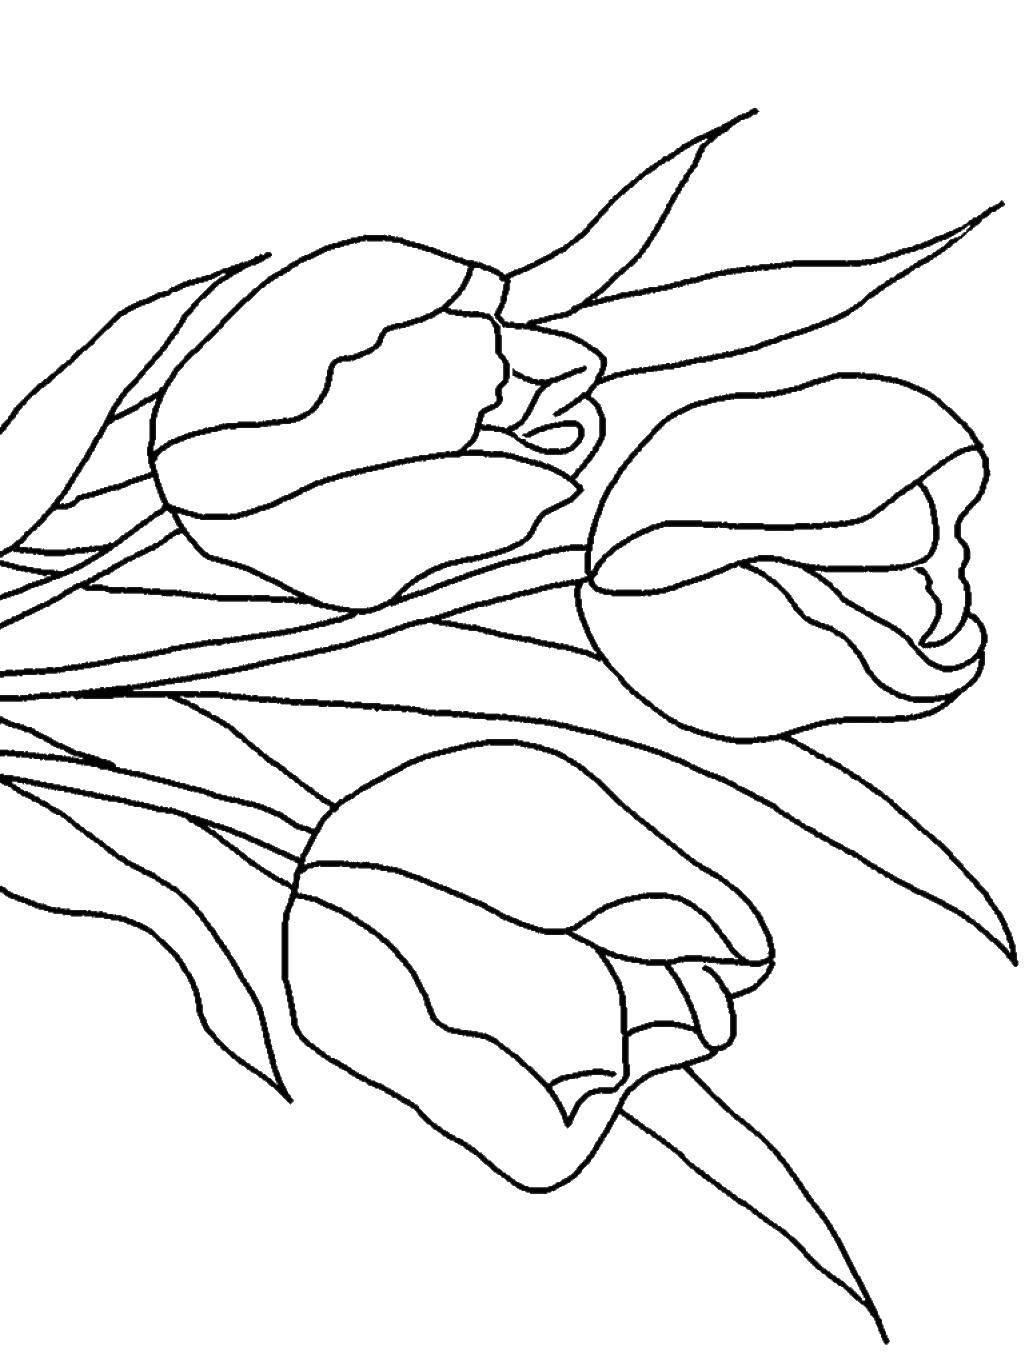 Coloring While the closed buds. Category flowers. Tags:  Flowers, tulips.